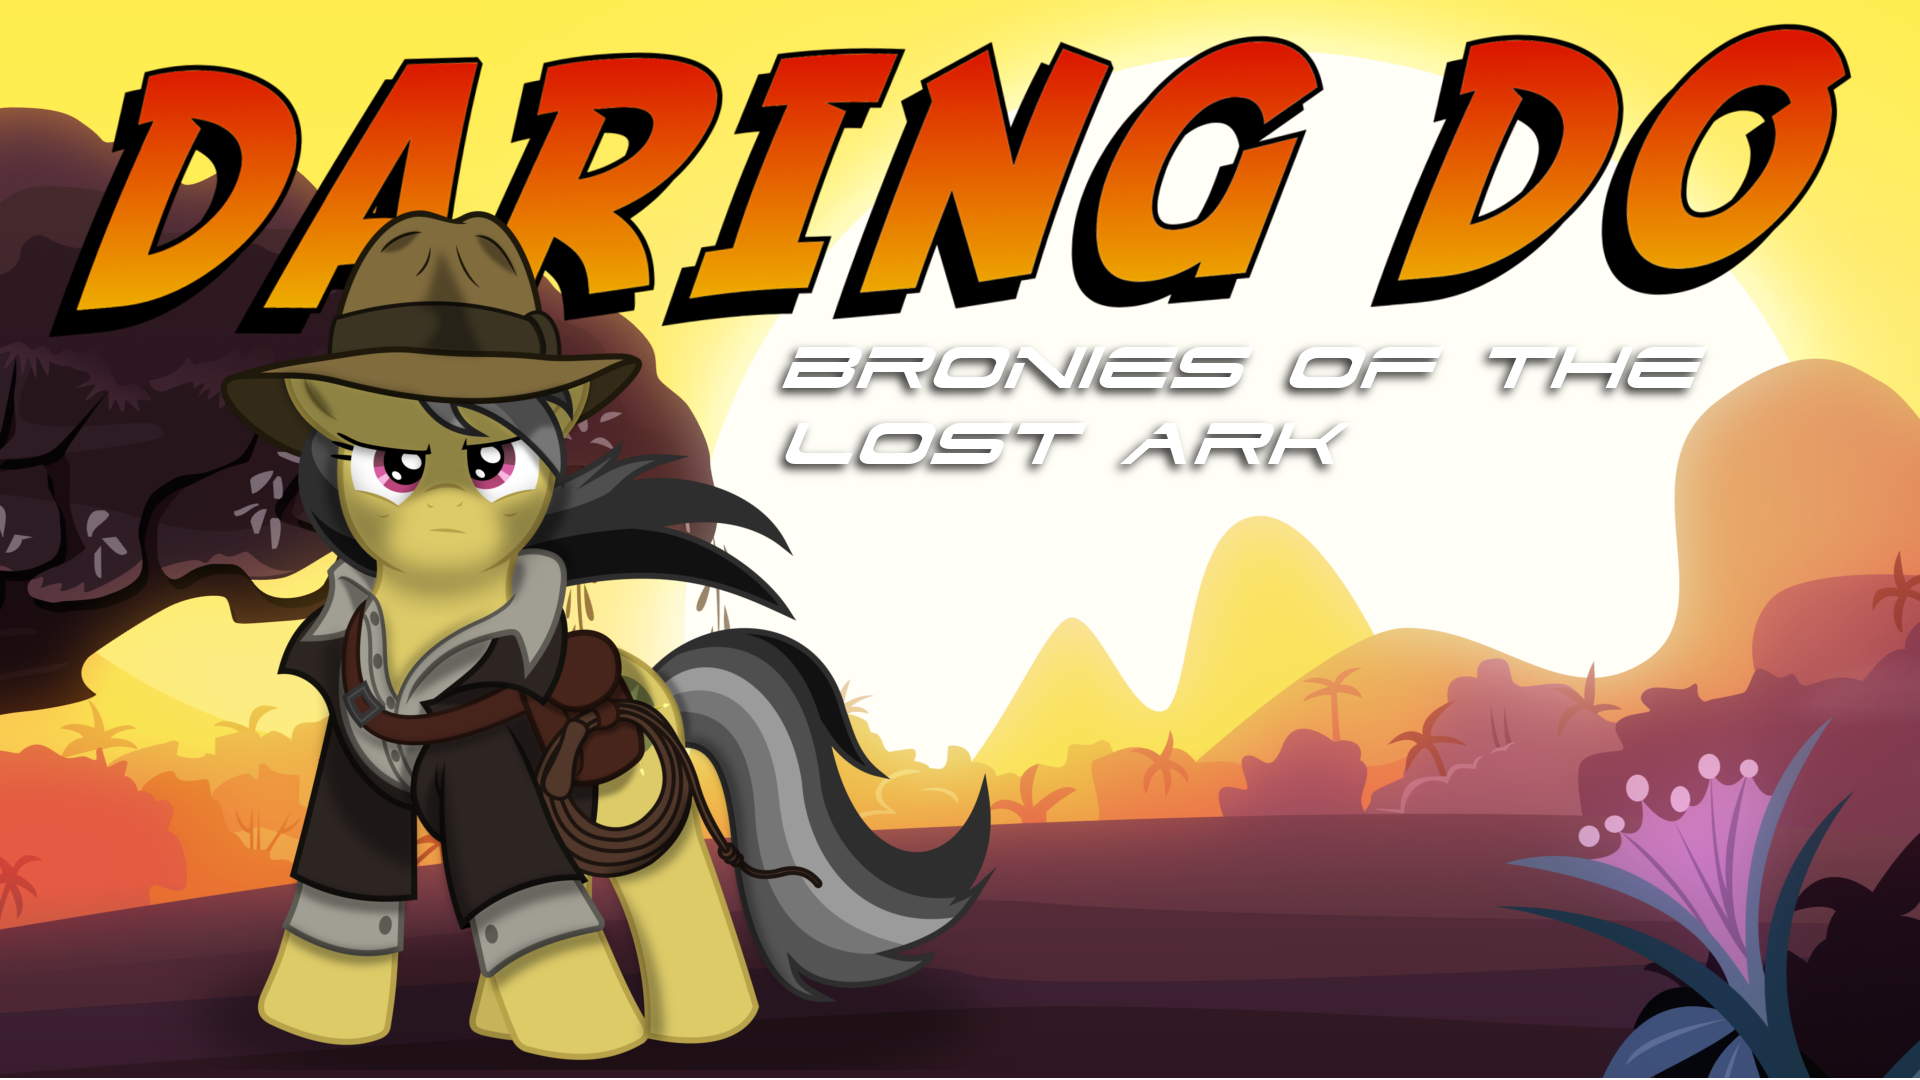 Bronies of the Lost Ark by Cooltomorrowkid, knight33 and RDbrony16